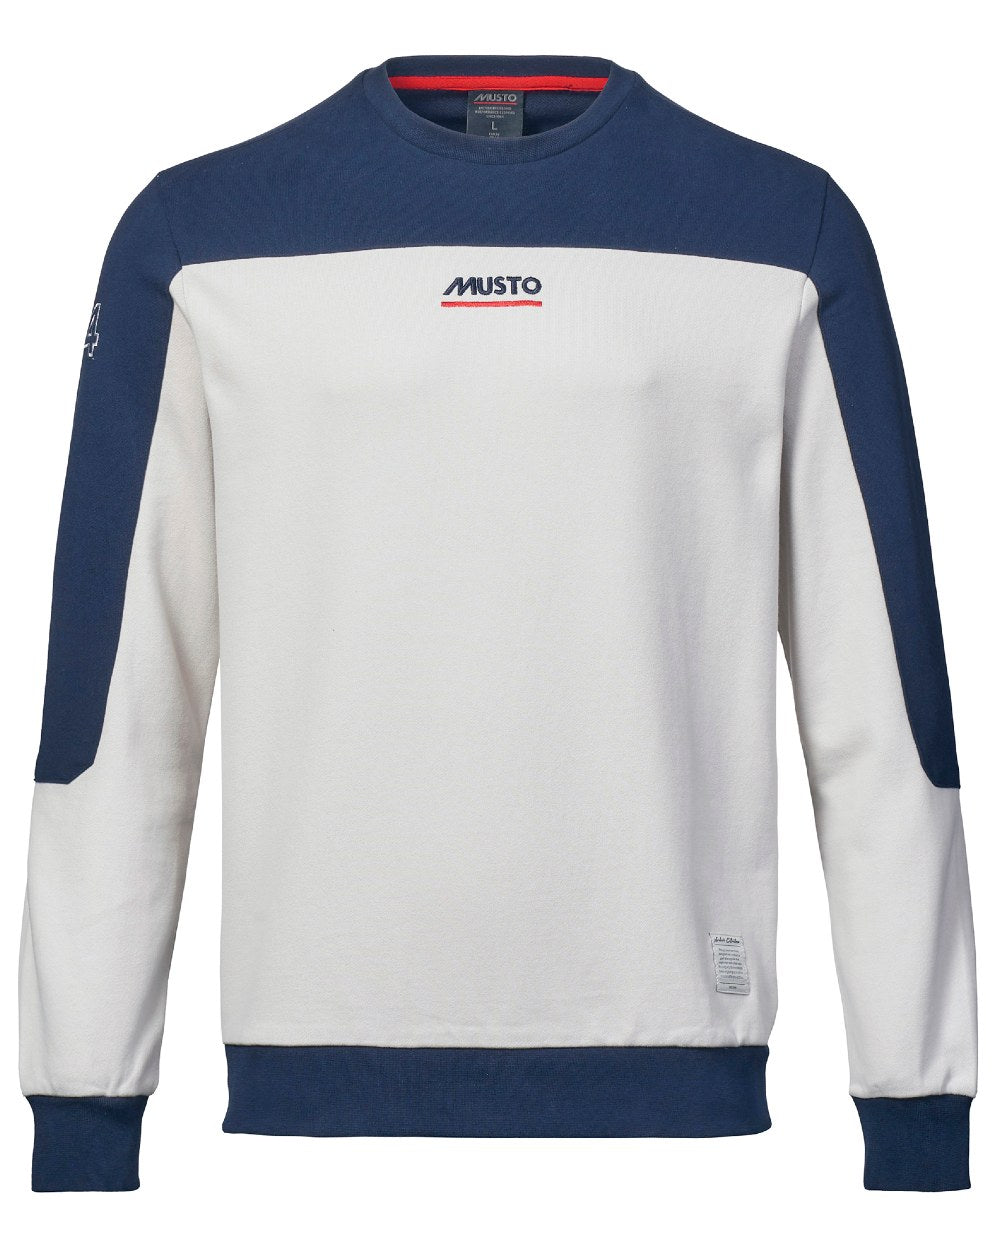 Platinum/Navy Coloured Musto Mens 64 Crew Neck Sweat On A White Background 